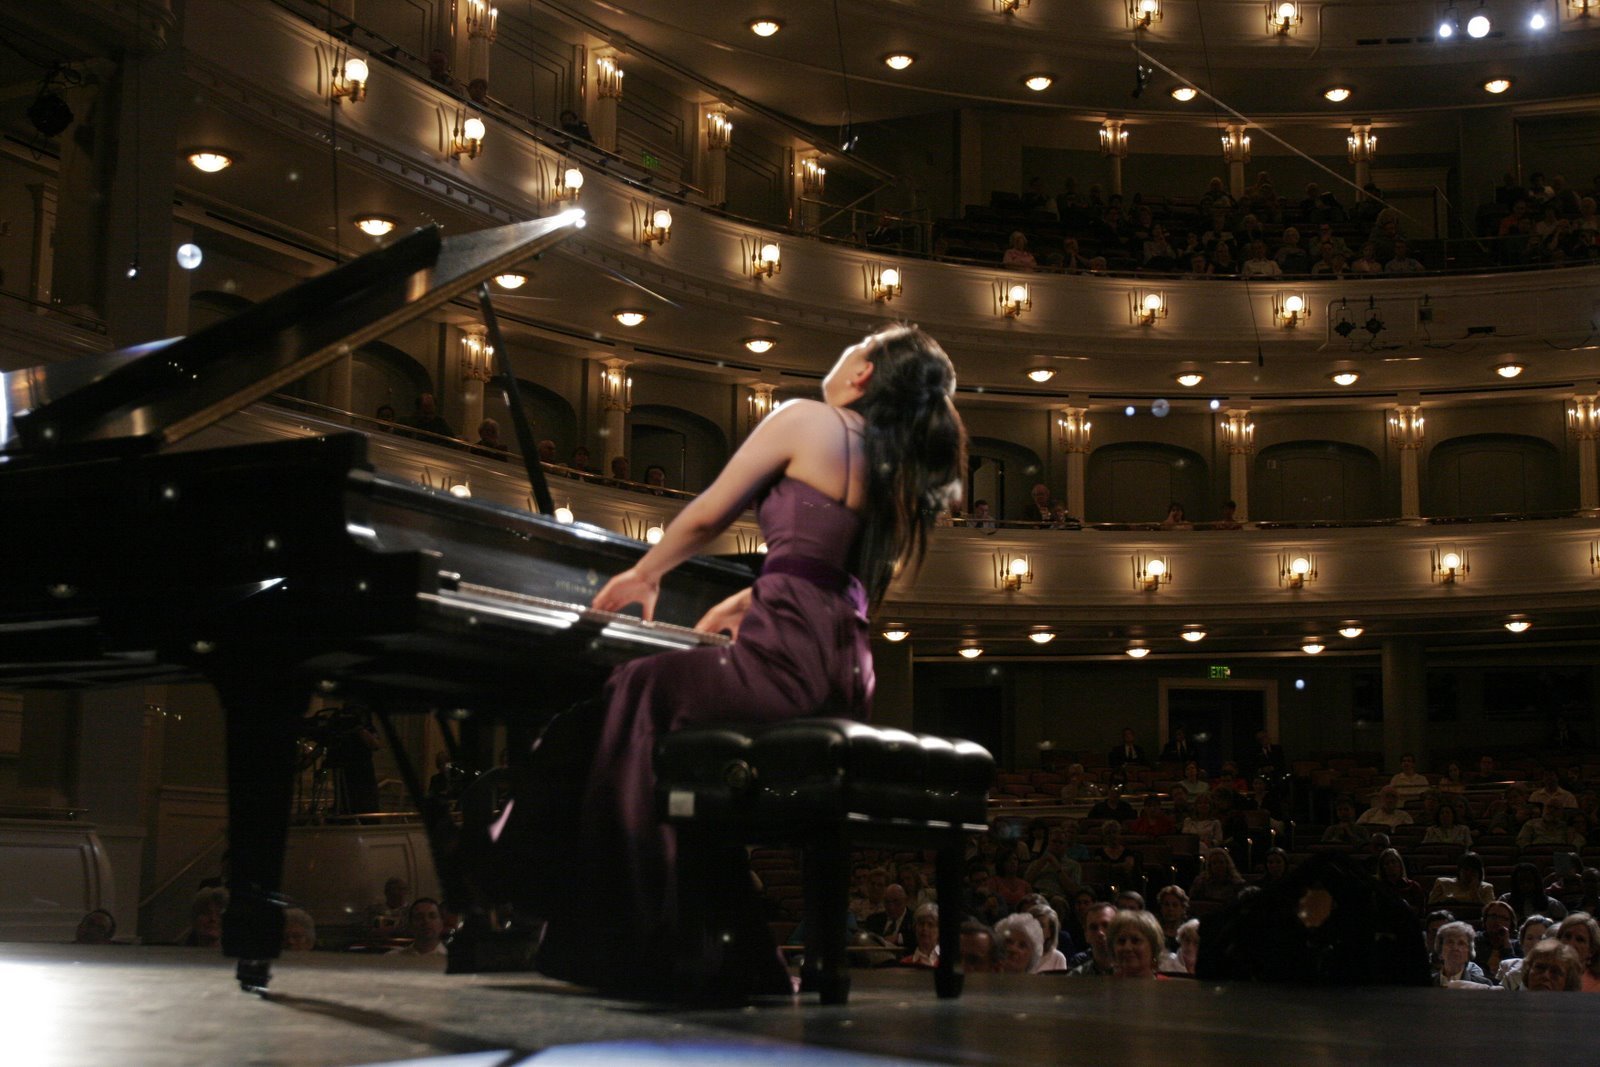 The Van Cliburn International Piano Competition